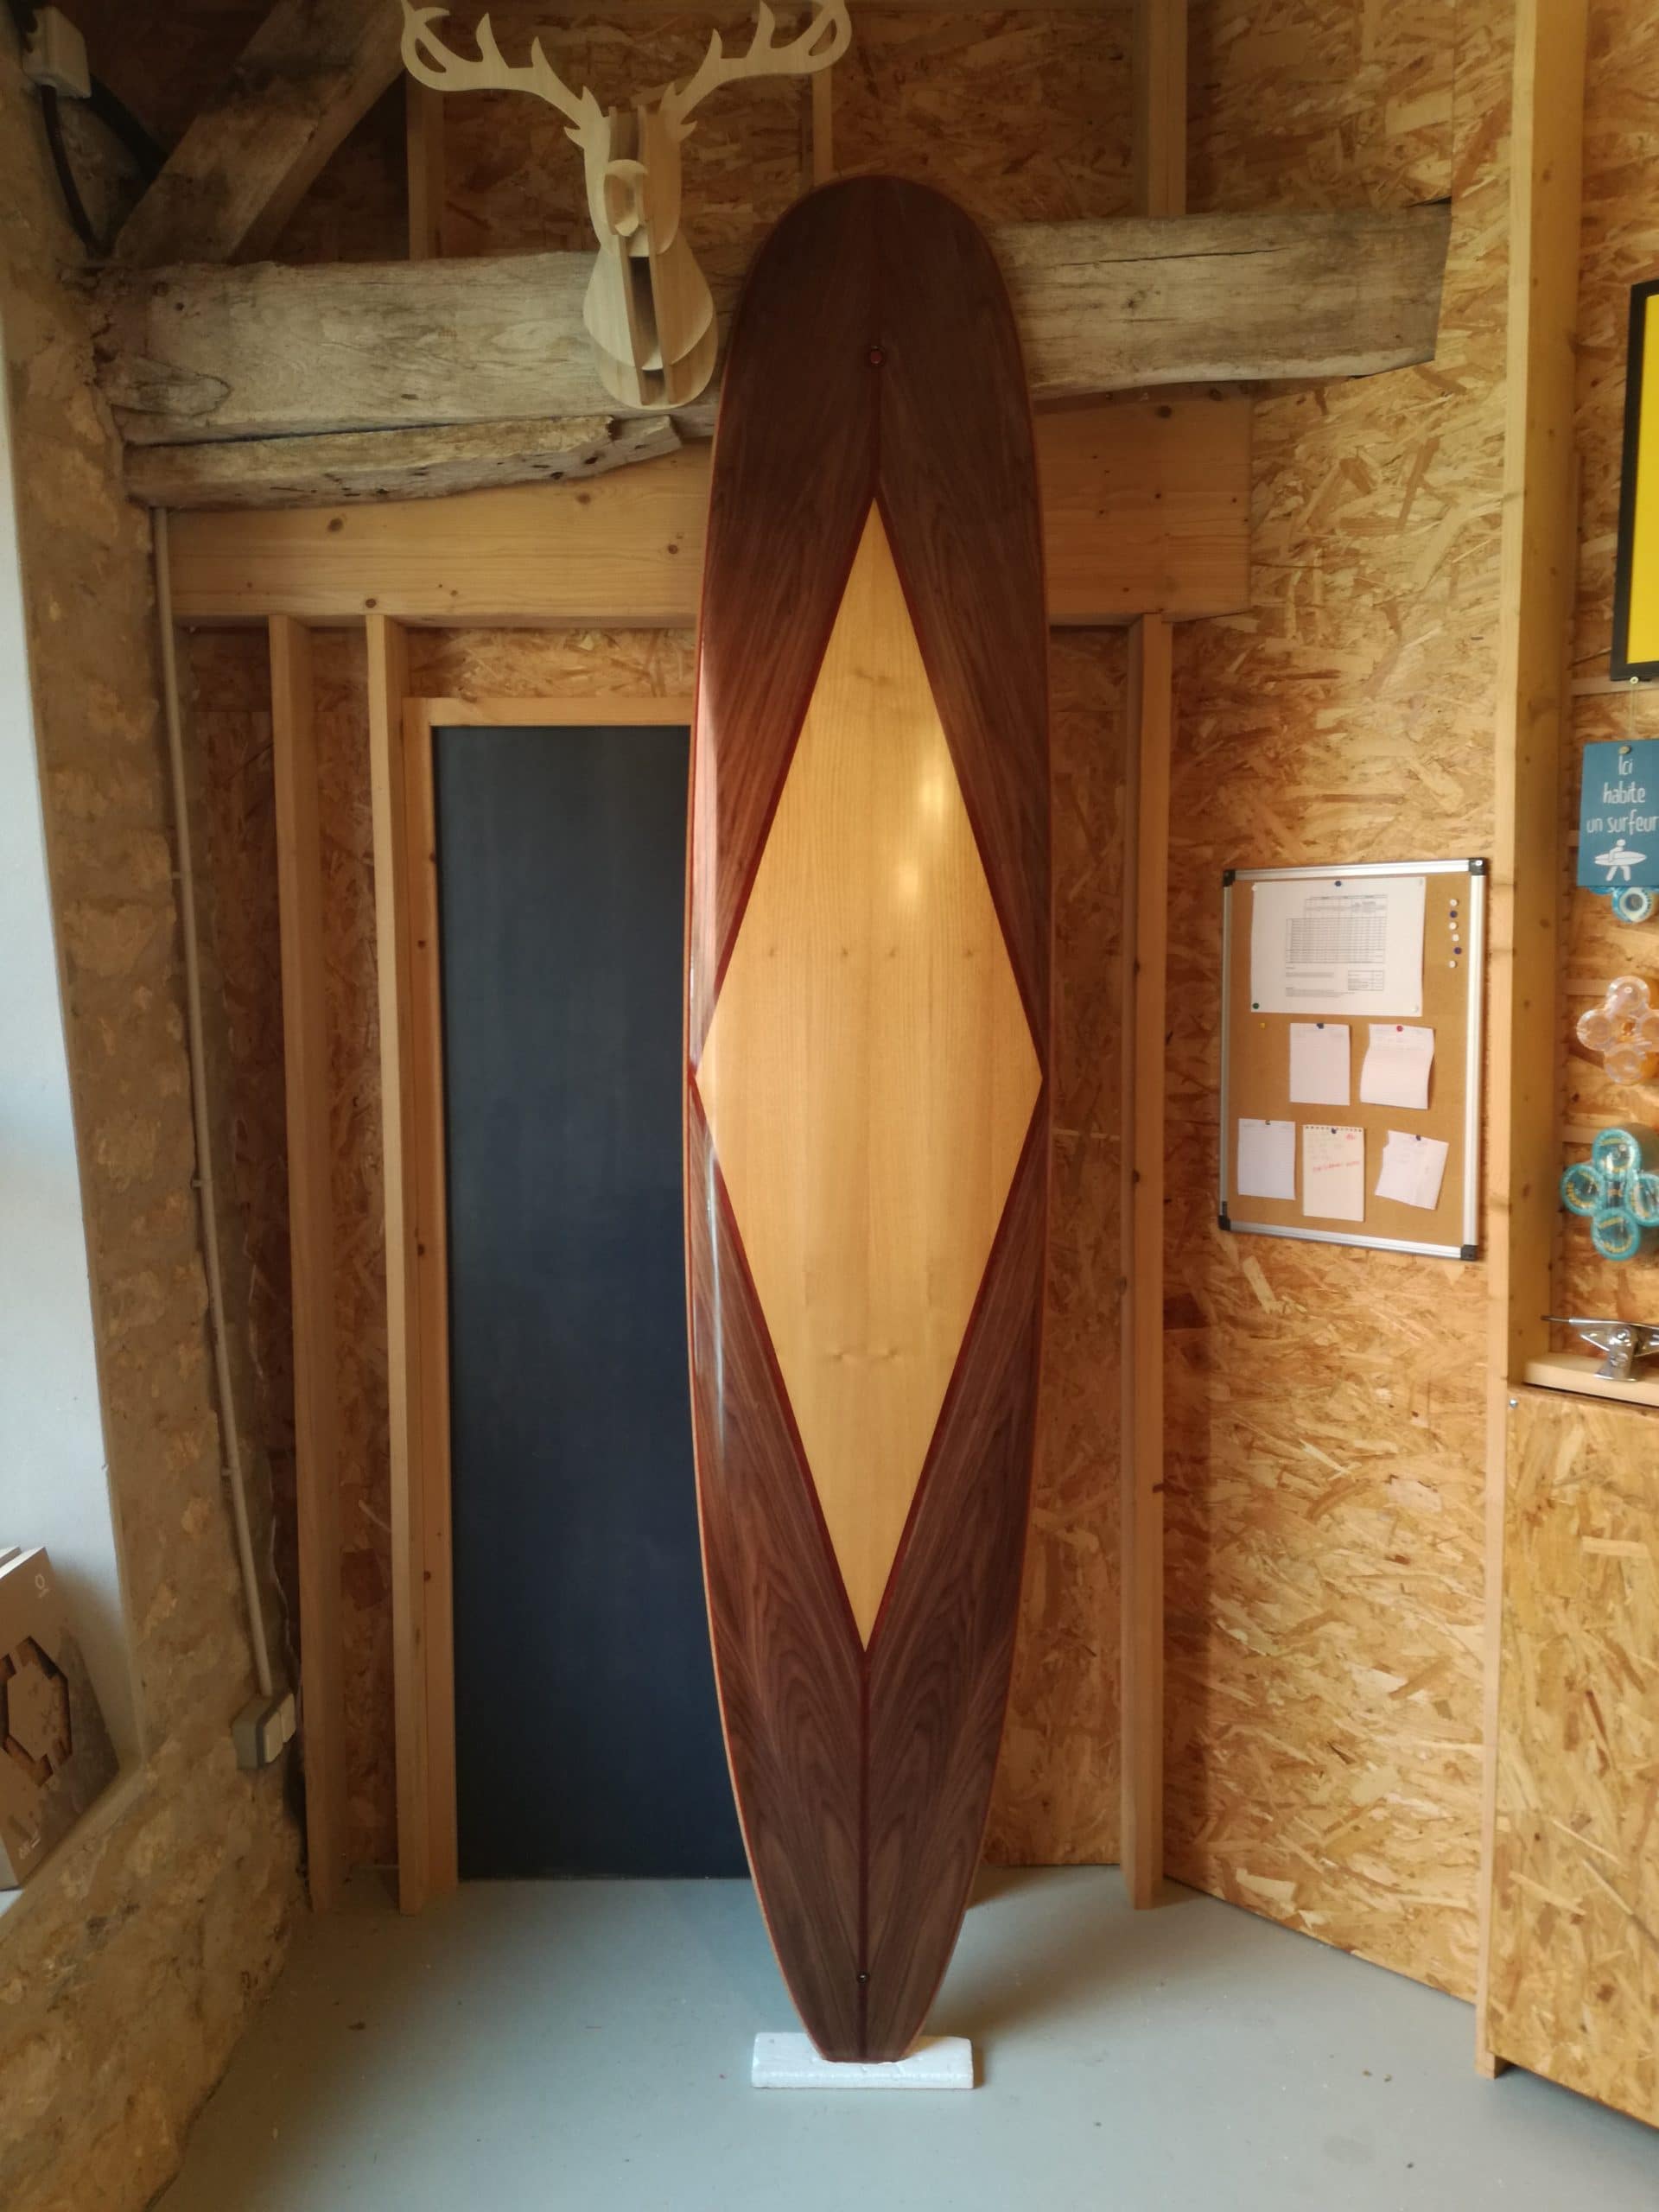 Image planches surf longboard